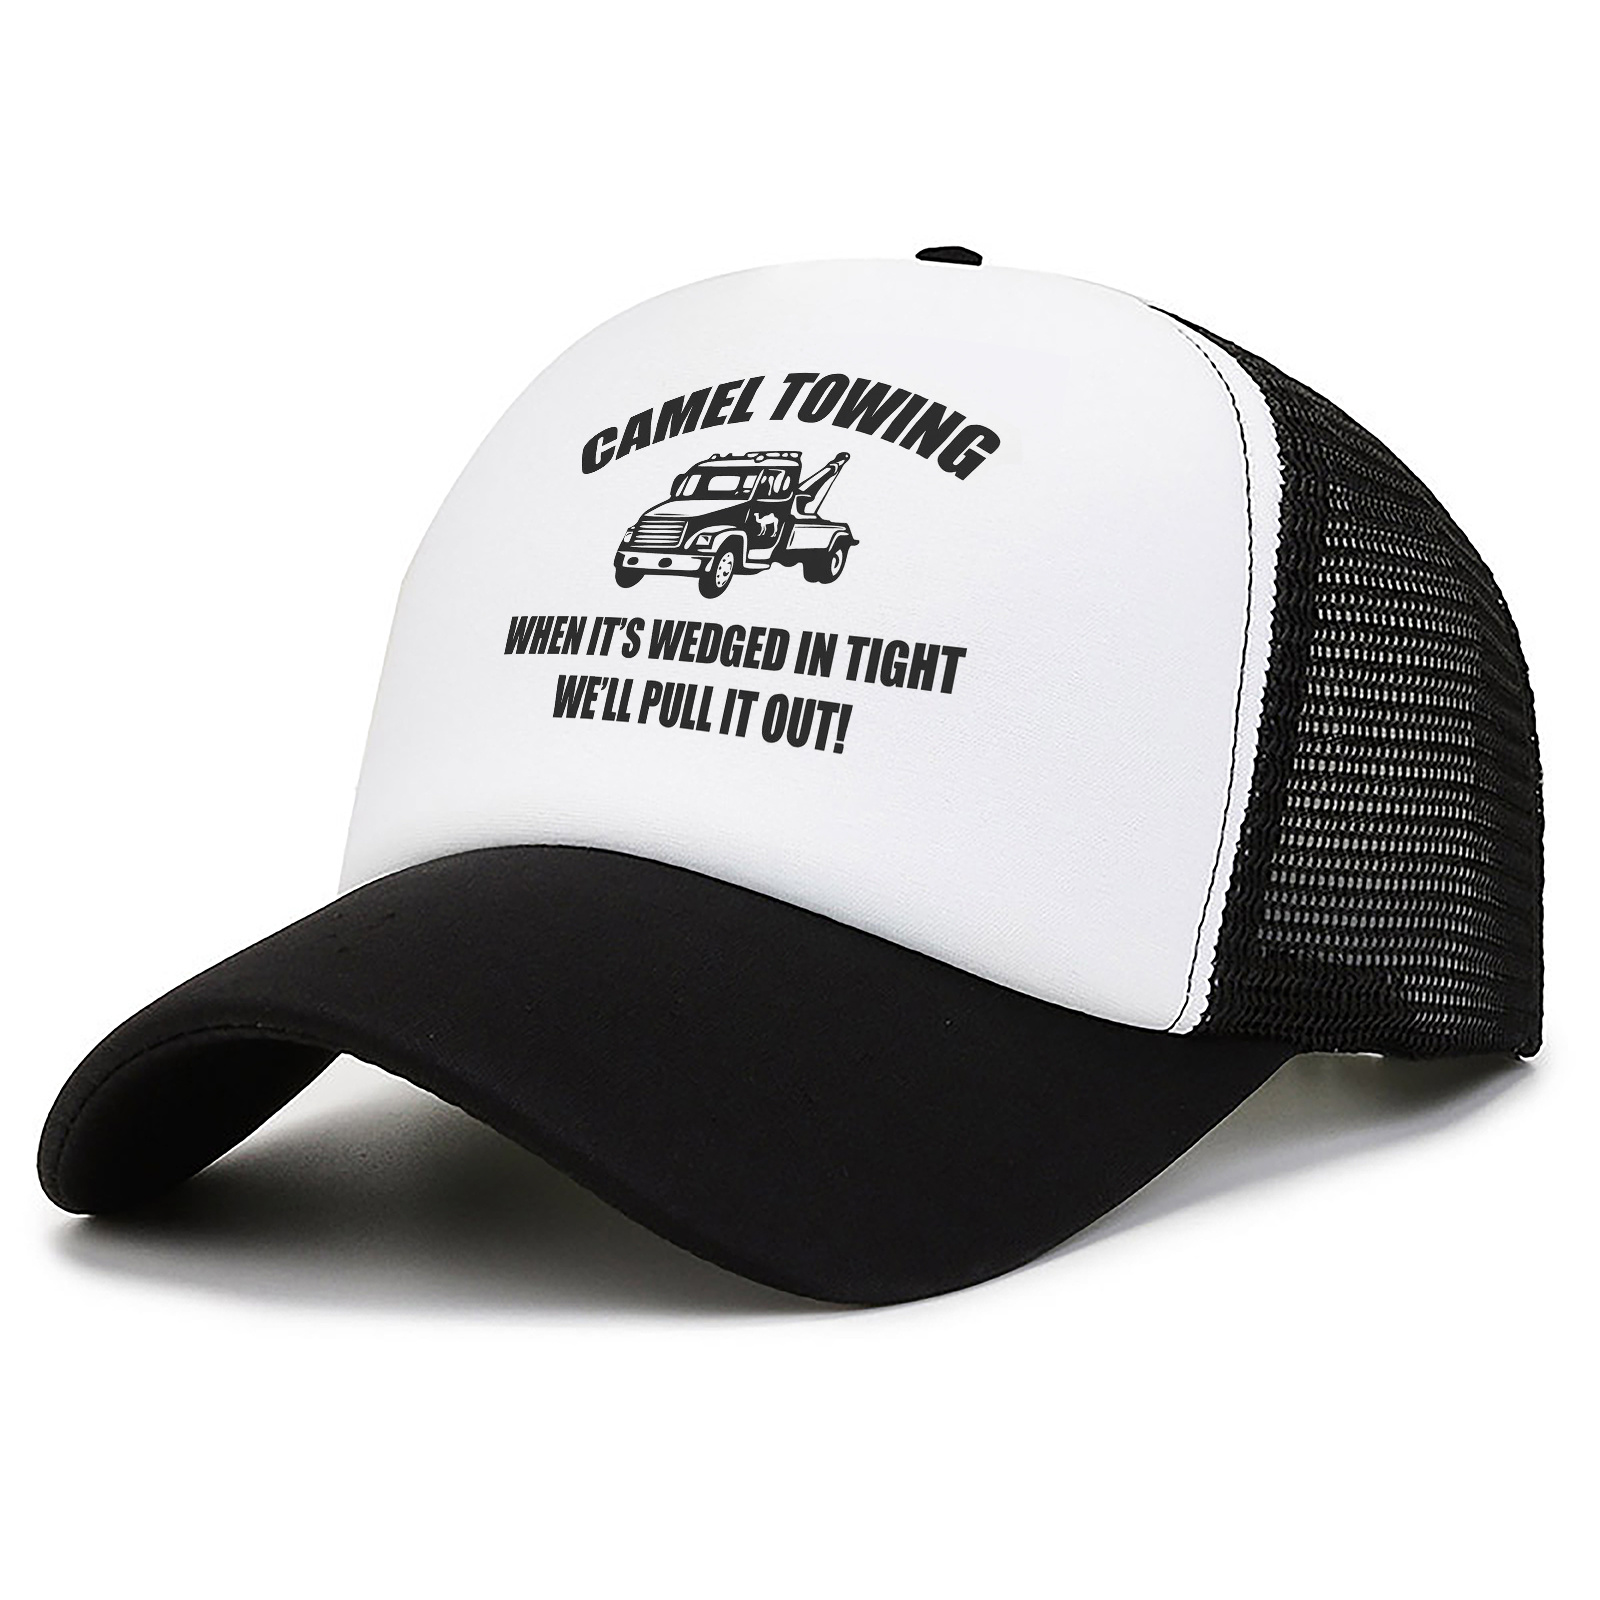 Funny Trucker Hat, Letter Print Sunshade Casual Dad Hat For Adult,  Adjustable Hip Hops Sports Baseball Cap For Fishing & Outdoor Sports,  Fashion Summe